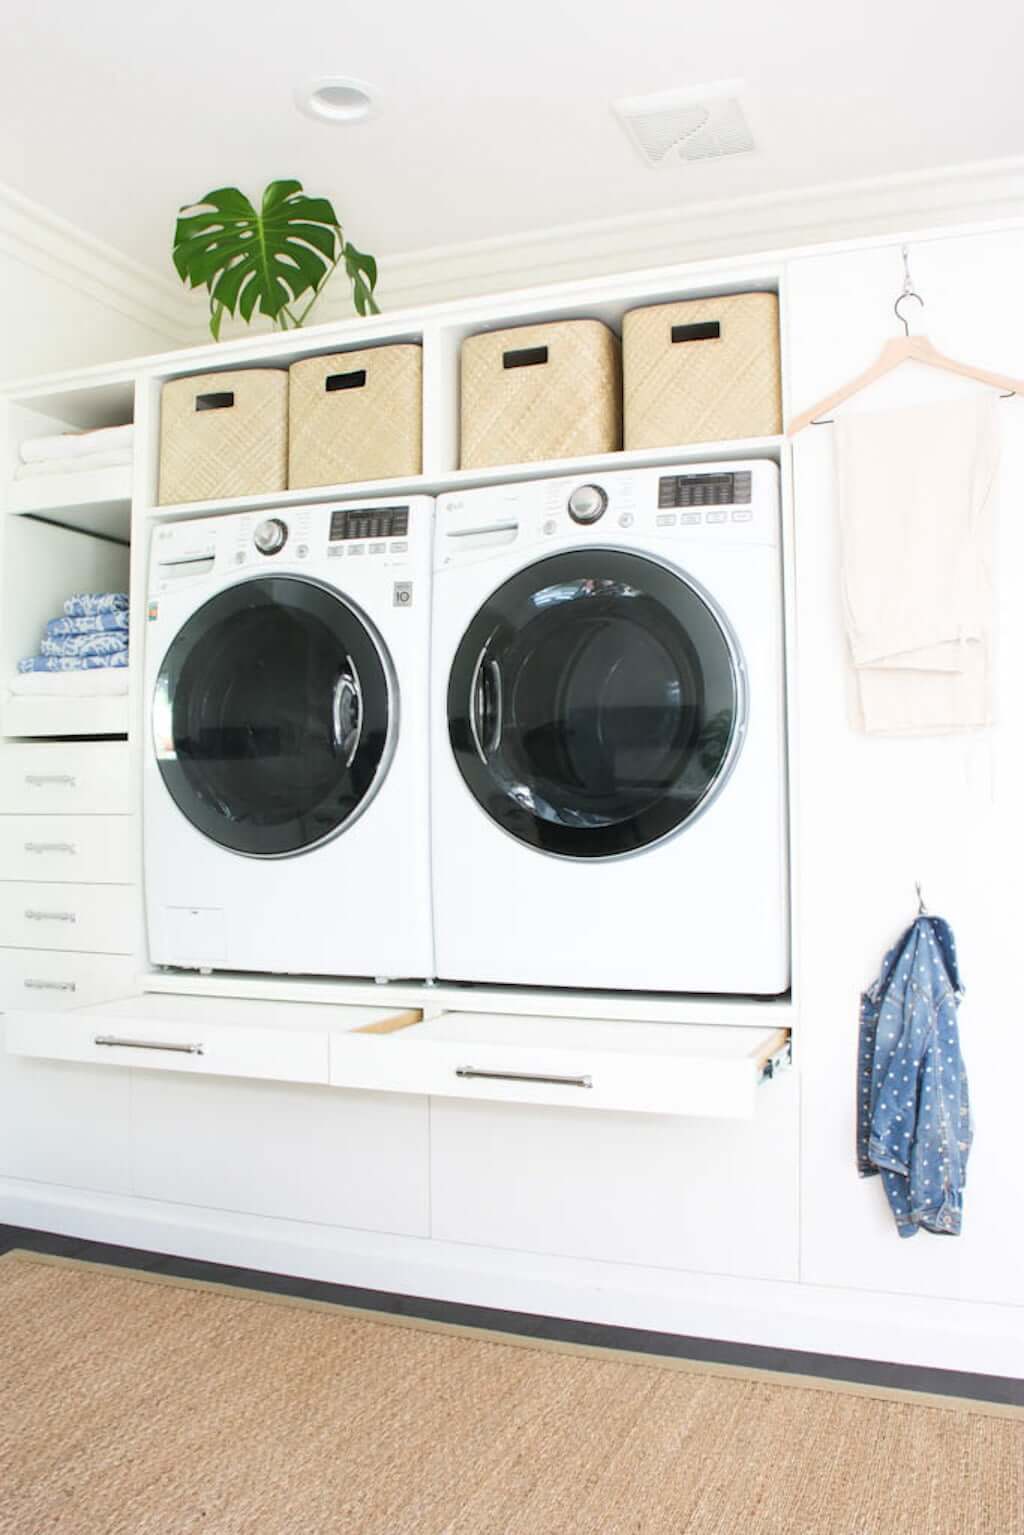 laundry room shelving under washing machine, above washer/dryer, and to side